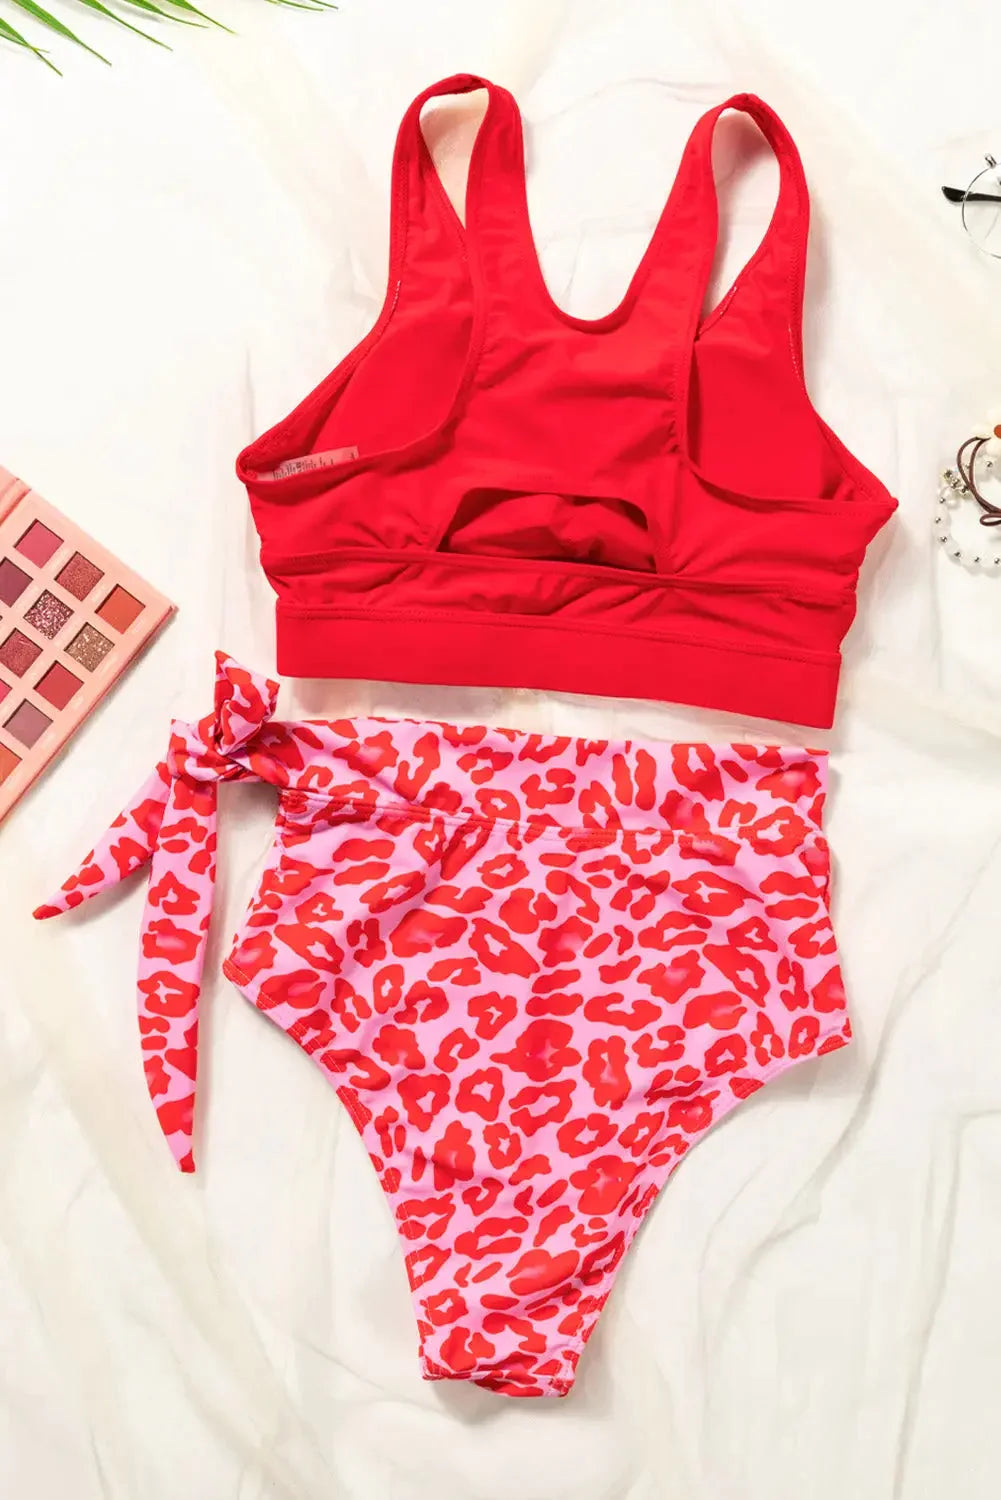 Red sky blue floral printed high waist lace up bikini set - swimsuits